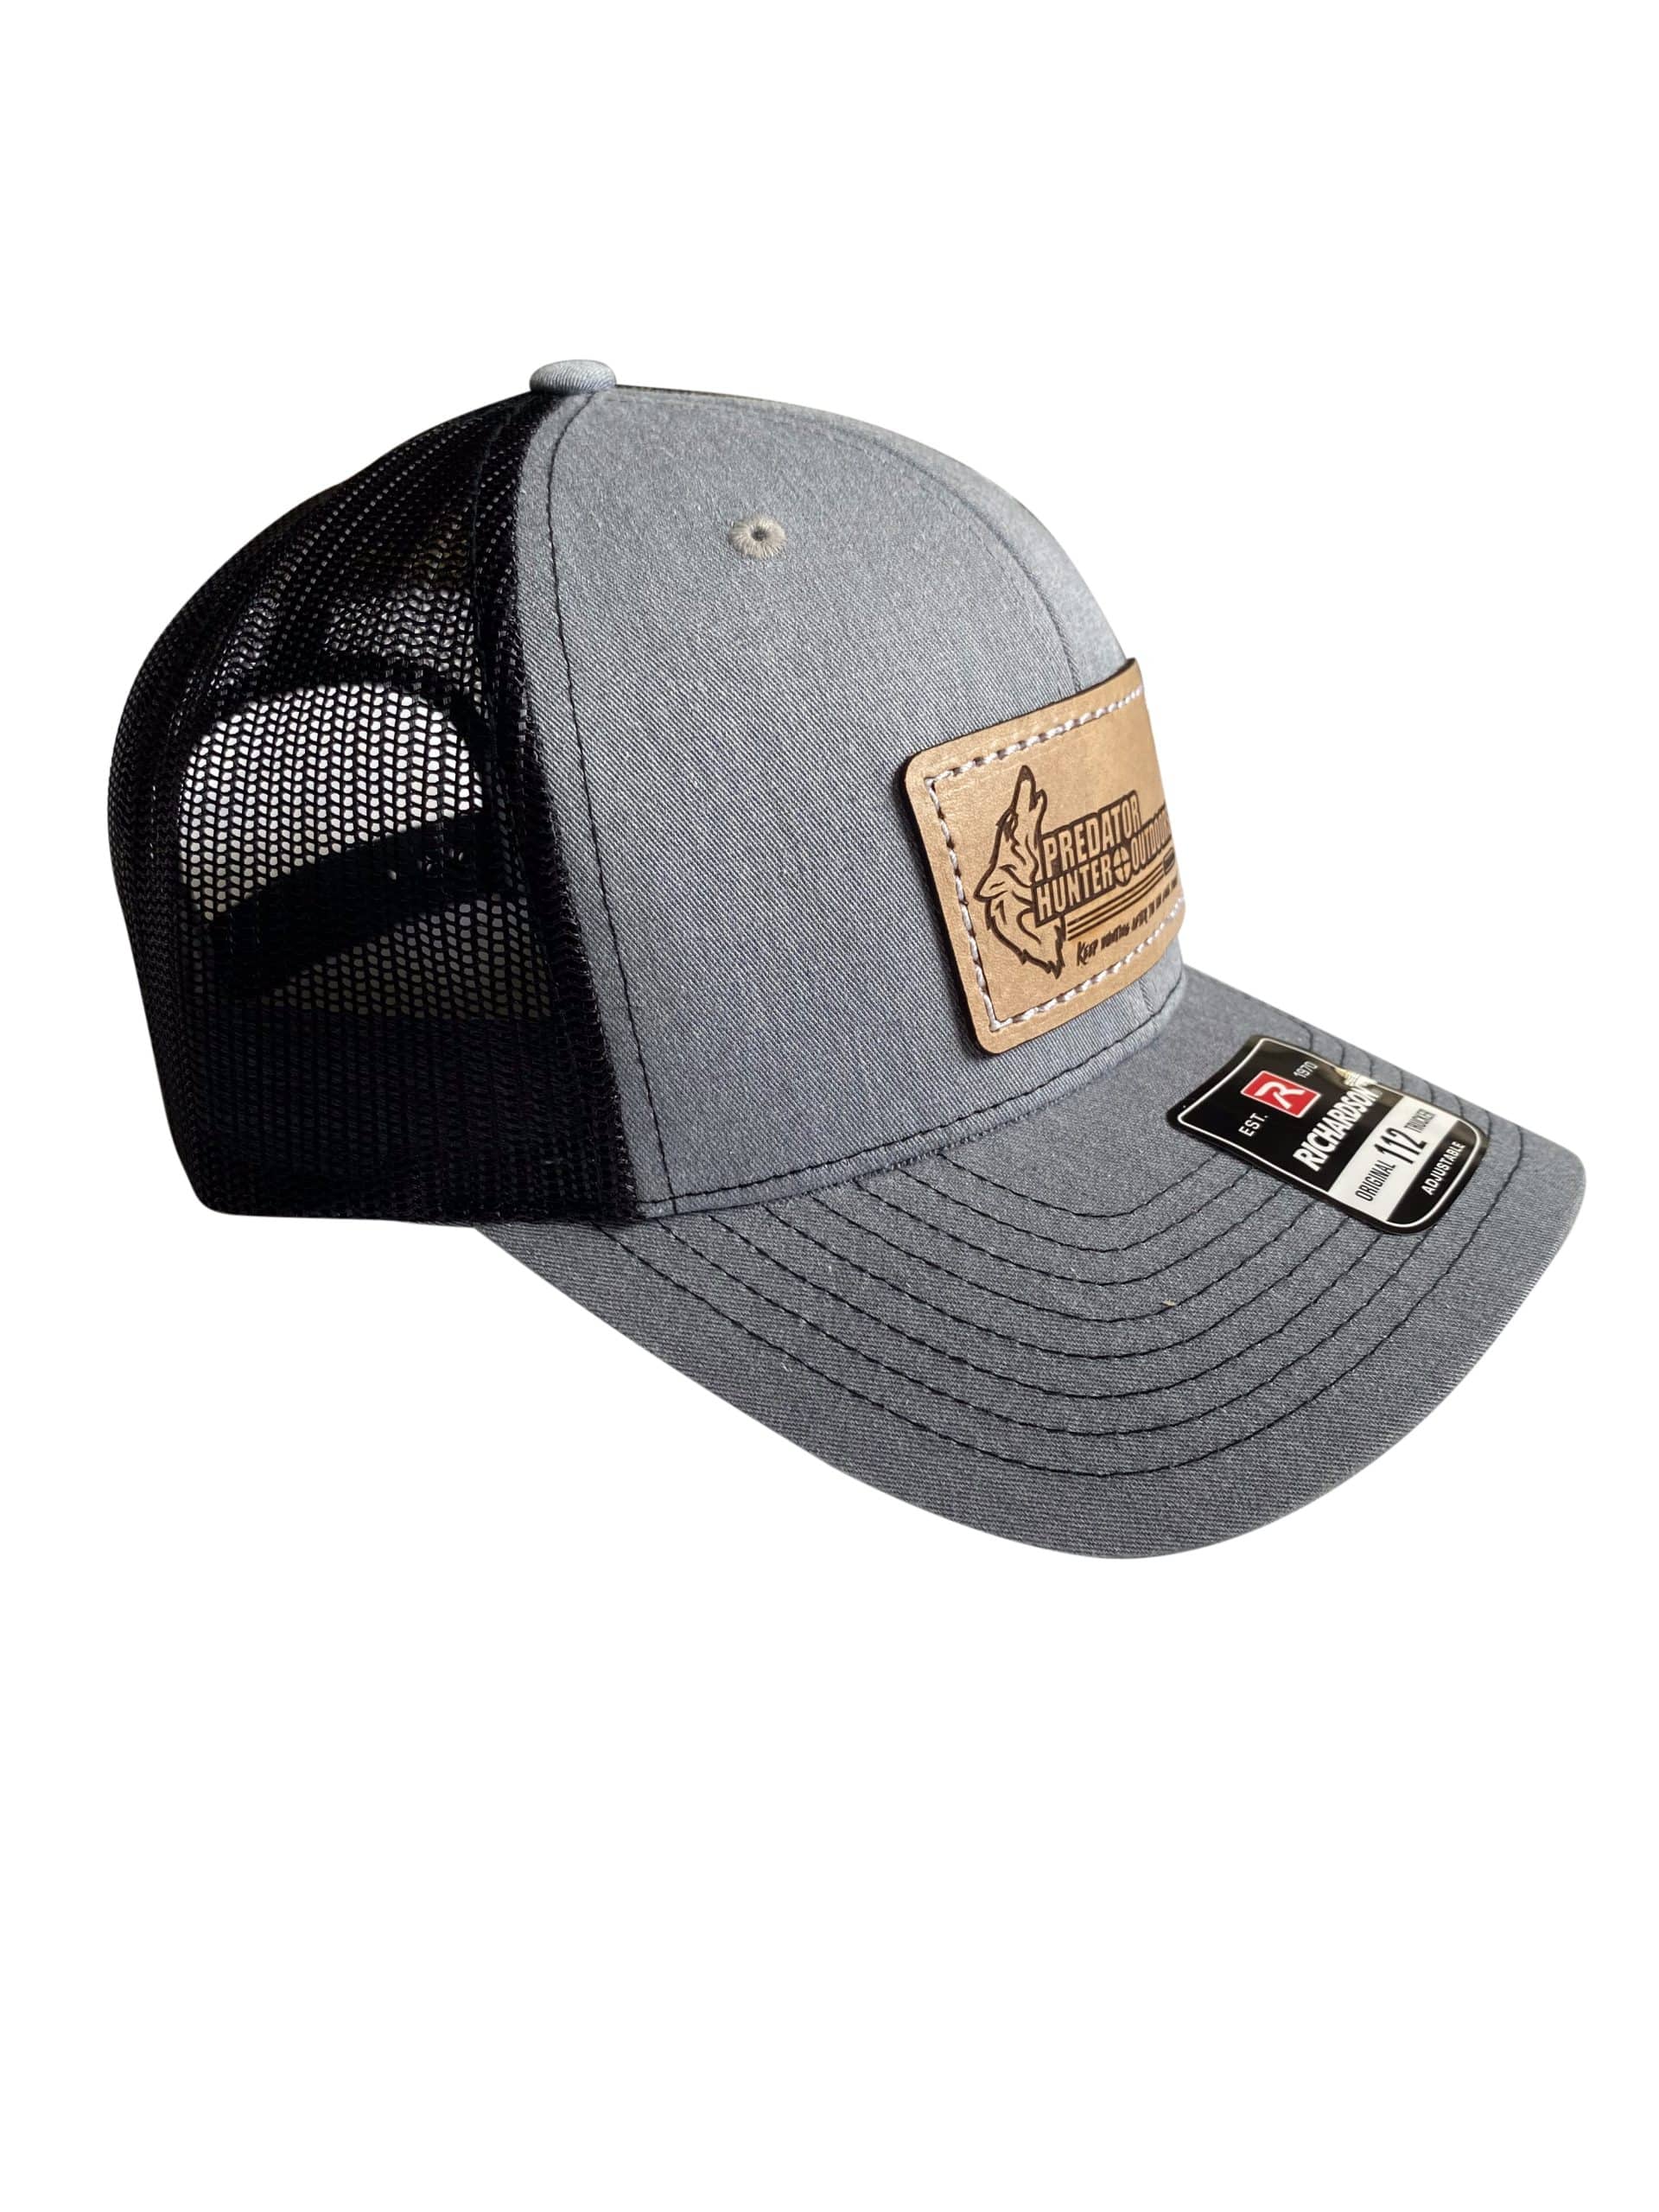 Predator Hunter Outdoors Hat - Leather Patch